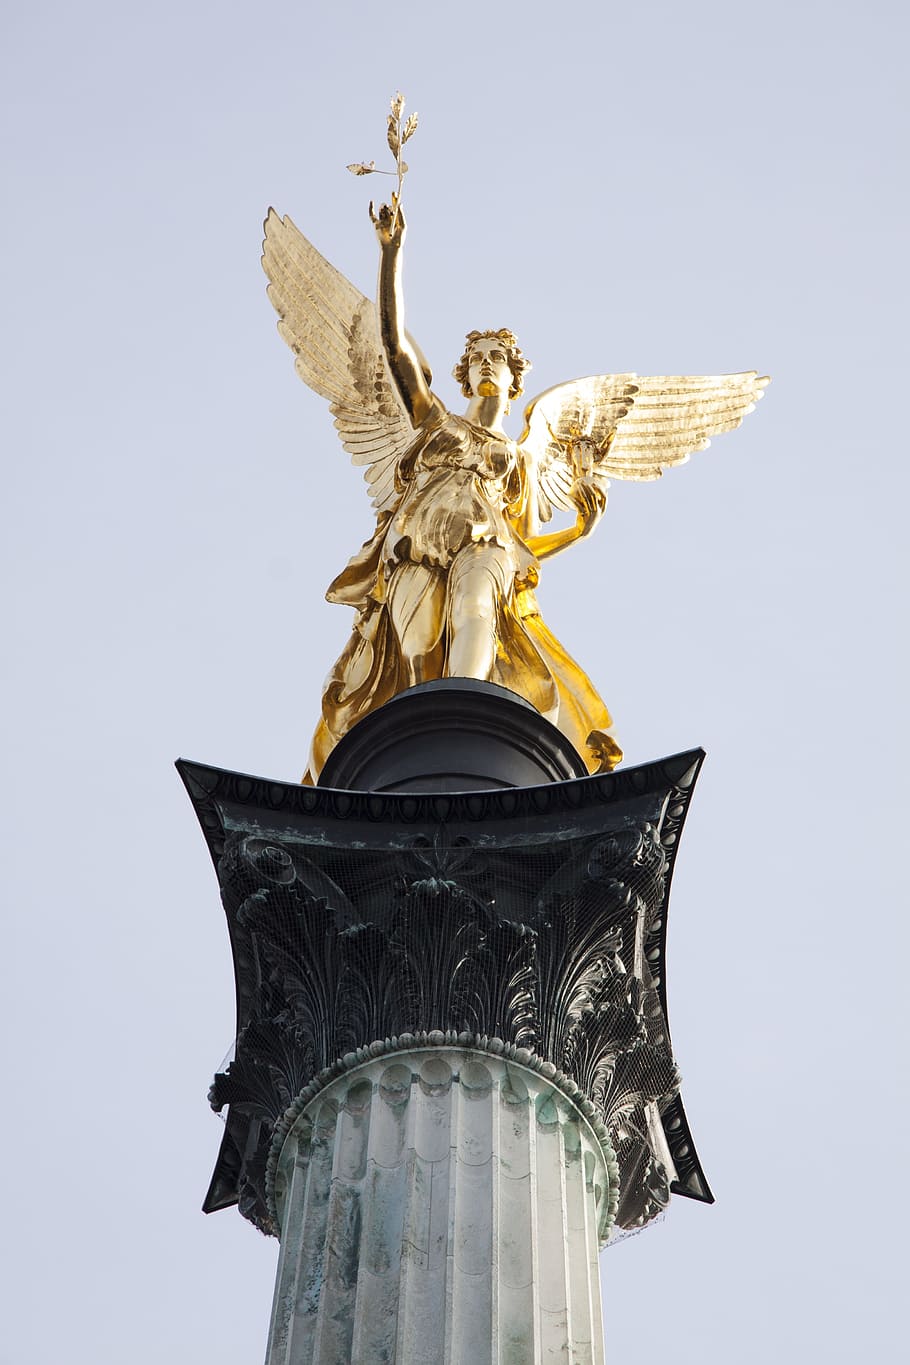 winged person statue, Statue, Angel, Gold, Gilded, leaf gilded bronze, wing, monument, art, munich